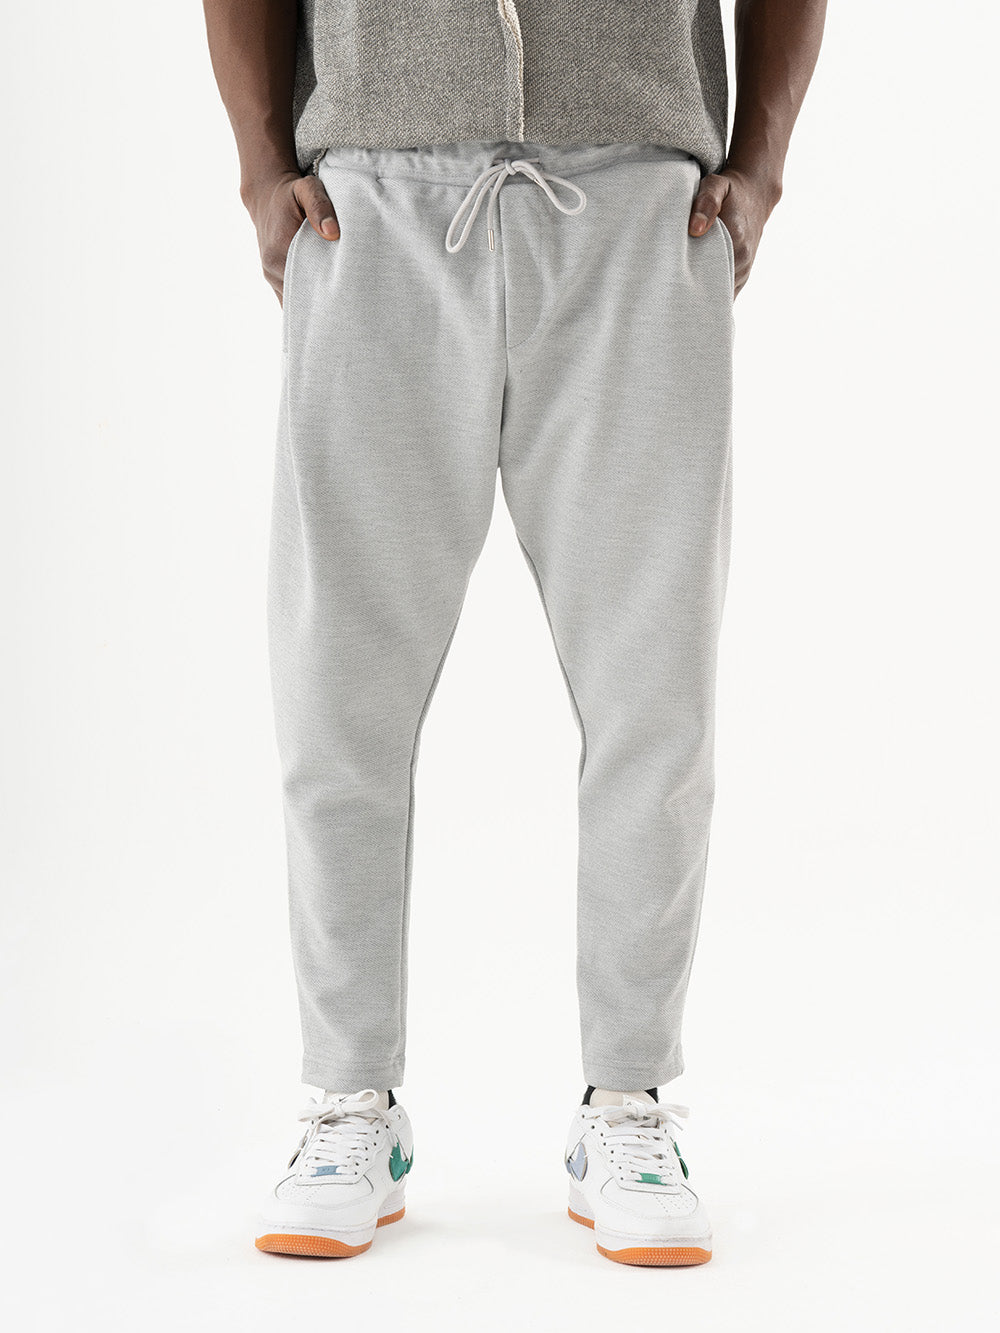 A man wearing comfortable SERENE JOGGERS and a cozy grey hoodie, perfect for everyday wear.